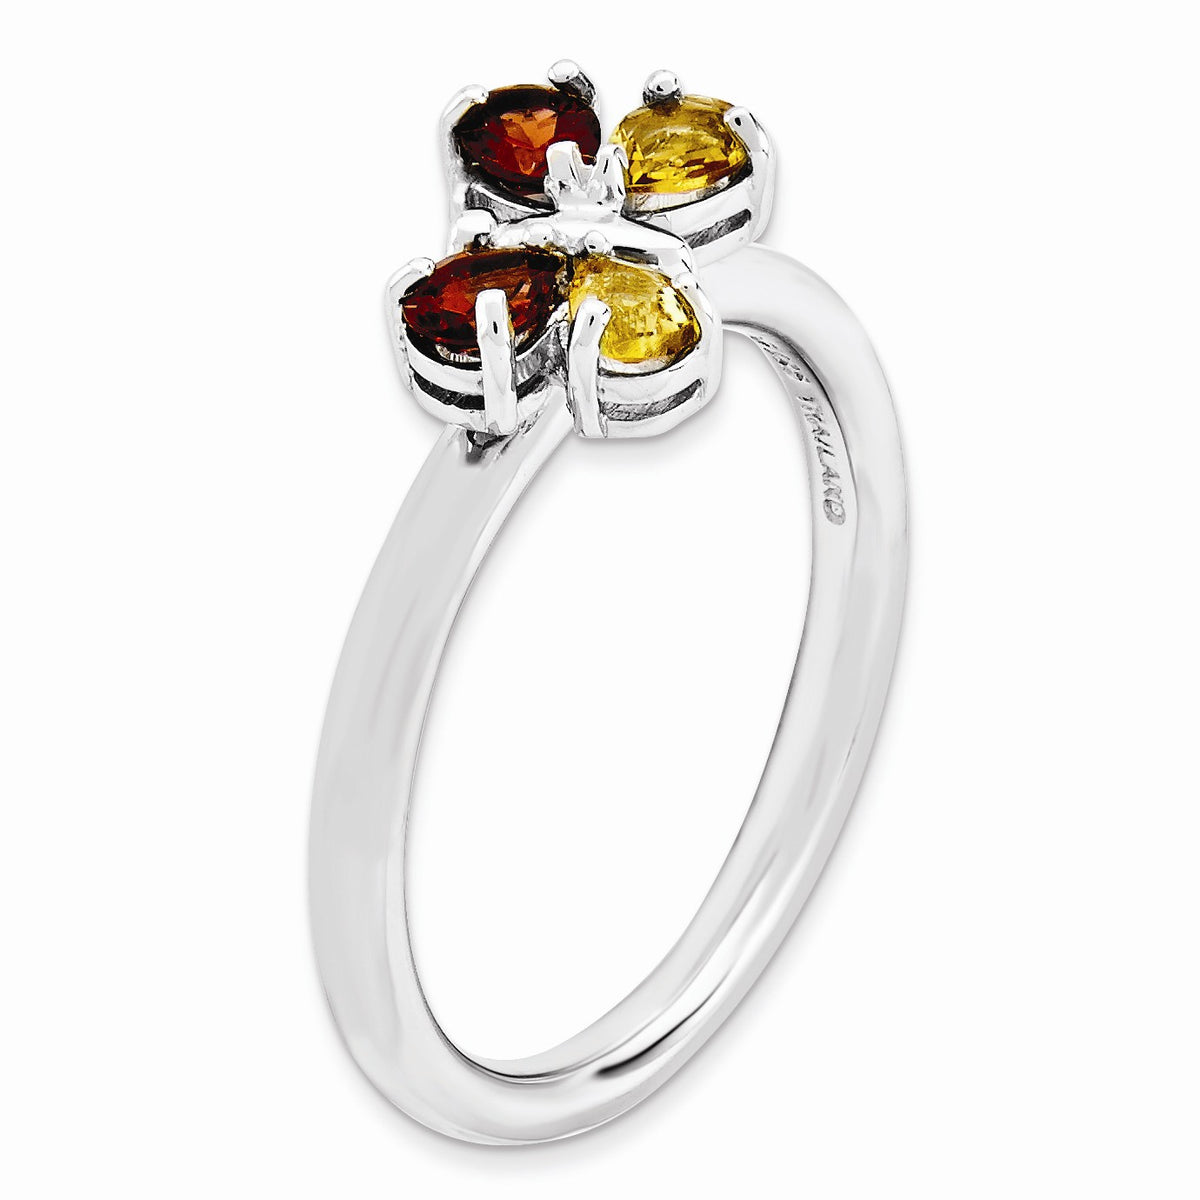 Alternate view of the Stackable Pear Shape Garnet and Citrine Gemstone Butterfly Ring by The Black Bow Jewelry Co.